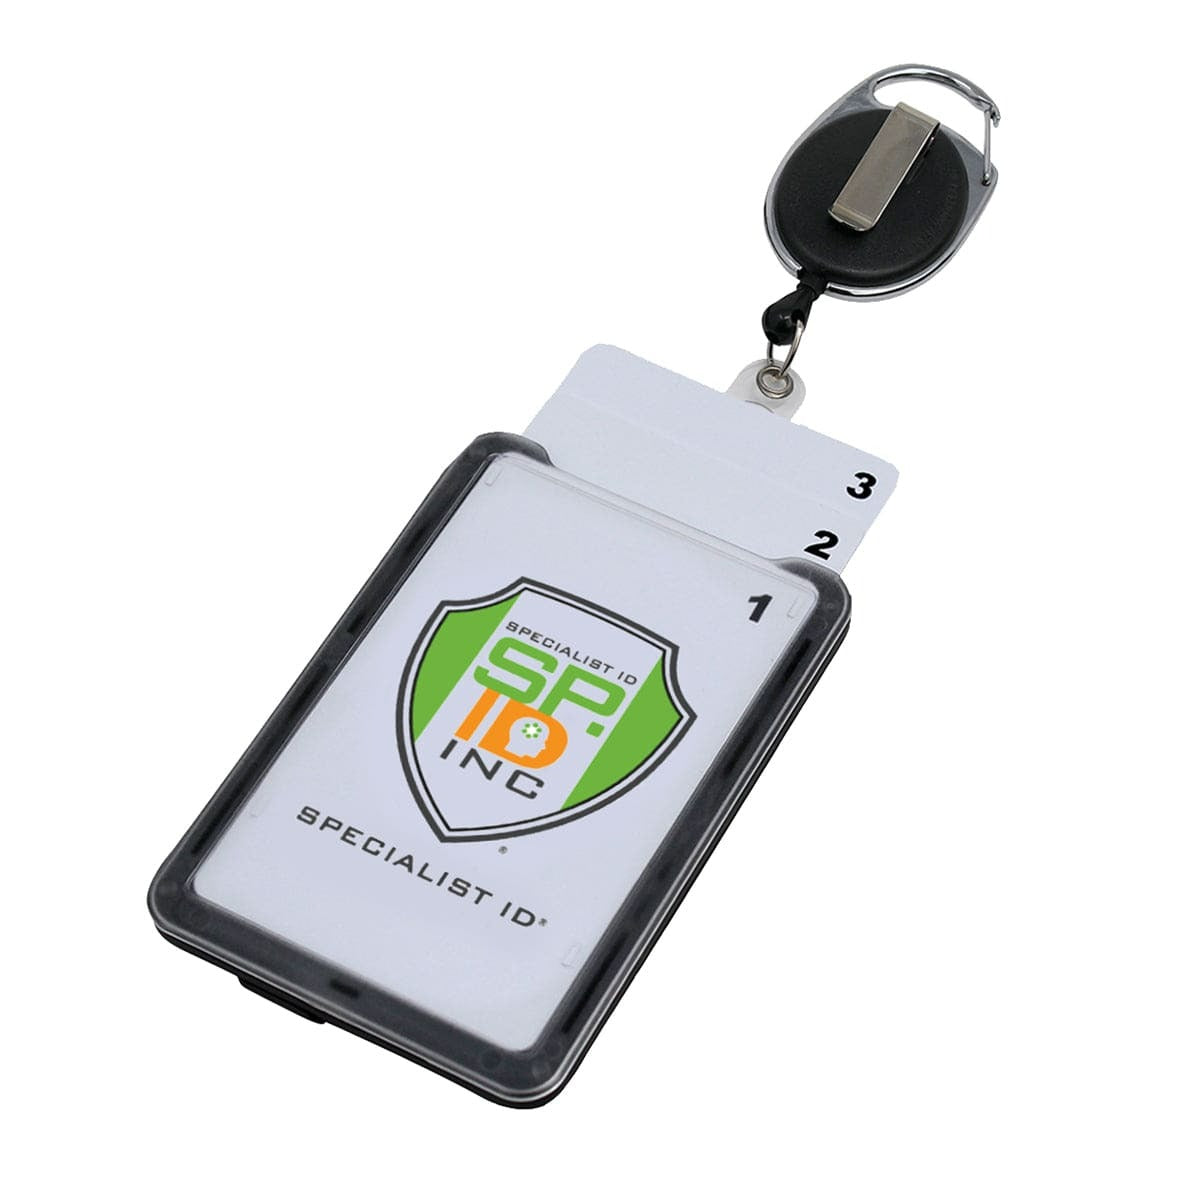 ID Badge Holder with Lanyard, Retractable Badge Holders Reels with